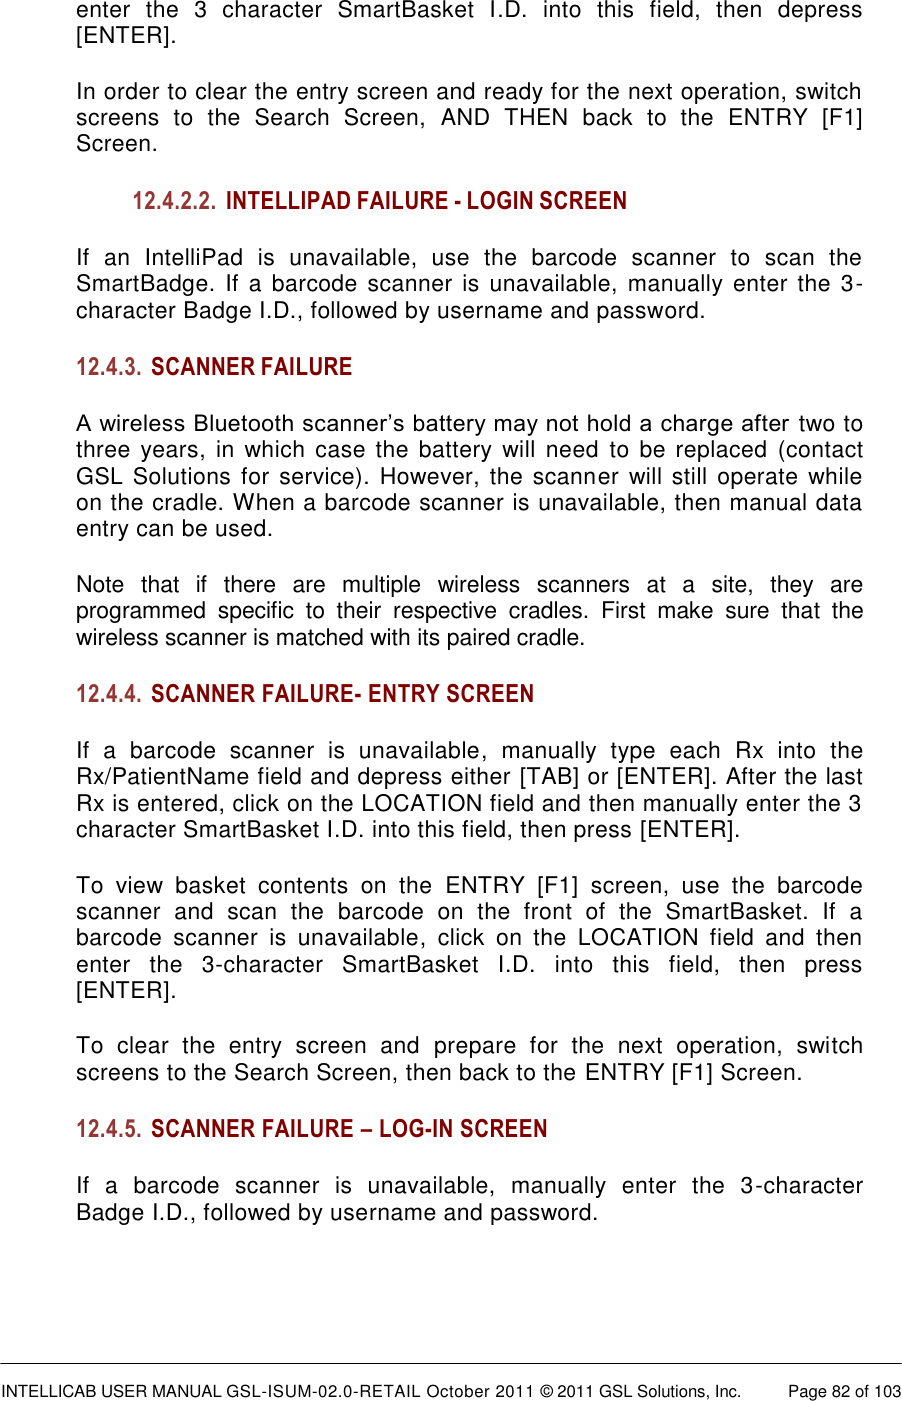  INTELLICAB USER MANUAL GSL-ISUM-02.0-RETAIL October 2011 © 2011 GSL Solutions, Inc.   Page 82 of 103   enter  the  3  character  SmartBasket  I.D.  into  this  field,  then  depress [ENTER]. In order to clear the entry screen and ready for the next operation, switch screens  to  the  Search  Screen,  AND  THEN  back  to  the  ENTRY  [F1] Screen. 12.4.2.2. INTELLIPAD FAILURE - LOGIN SCREEN If an  IntelliPad  is  unavailable,  use  the  barcode  scanner  to  scan  the SmartBadge. If a  barcode  scanner  is  unavailable, manually enter the 3-character Badge I.D., followed by username and password. 12.4.3. SCANNER FAILURE A wireless Bluetooth scanner’s battery may not hold a charge after  two to three years, in  which case  the battery  will  need  to  be  replaced (contact GSL Solutions  for service). However, the scanner  will still operate while on the cradle. When a barcode scanner is unavailable, then manual data entry can be used. Note  that  if  there  are  multiple  wireless  scanners  at  a  site,  they  are programmed  specific  to  their  respective  cradles.  First  make  sure  that  the wireless scanner is matched with its paired cradle. 12.4.4. SCANNER FAILURE- ENTRY SCREEN If  a  barcode  scanner  is  unavailable,  manually  type  each  Rx  into  the Rx/PatientName field and depress either [TAB] or [ENTER]. After the last Rx is entered, click on the LOCATION field and then manually enter the 3 character SmartBasket I.D. into this field, then press [ENTER]. To  view  basket  contents  on  the  ENTRY  [F1]  screen,  use  the  barcode scanner  and  scan  the  barcode  on  the  front  of  the  SmartBasket.  If  a barcode  scanner  is  unavailable,  click  on  the  LOCATION  field  and  then enter  the  3-character  SmartBasket  I.D.  into  this  field,  then  press [ENTER]. To  clear  the  entry  screen  and  prepare  for  the  next  operation,  switch screens to the Search Screen, then back to the ENTRY [F1] Screen. 12.4.5. SCANNER FAILURE – LOG-IN SCREEN If  a  barcode  scanner  is  unavailable,  manually  enter  the  3-character Badge I.D., followed by username and password.  